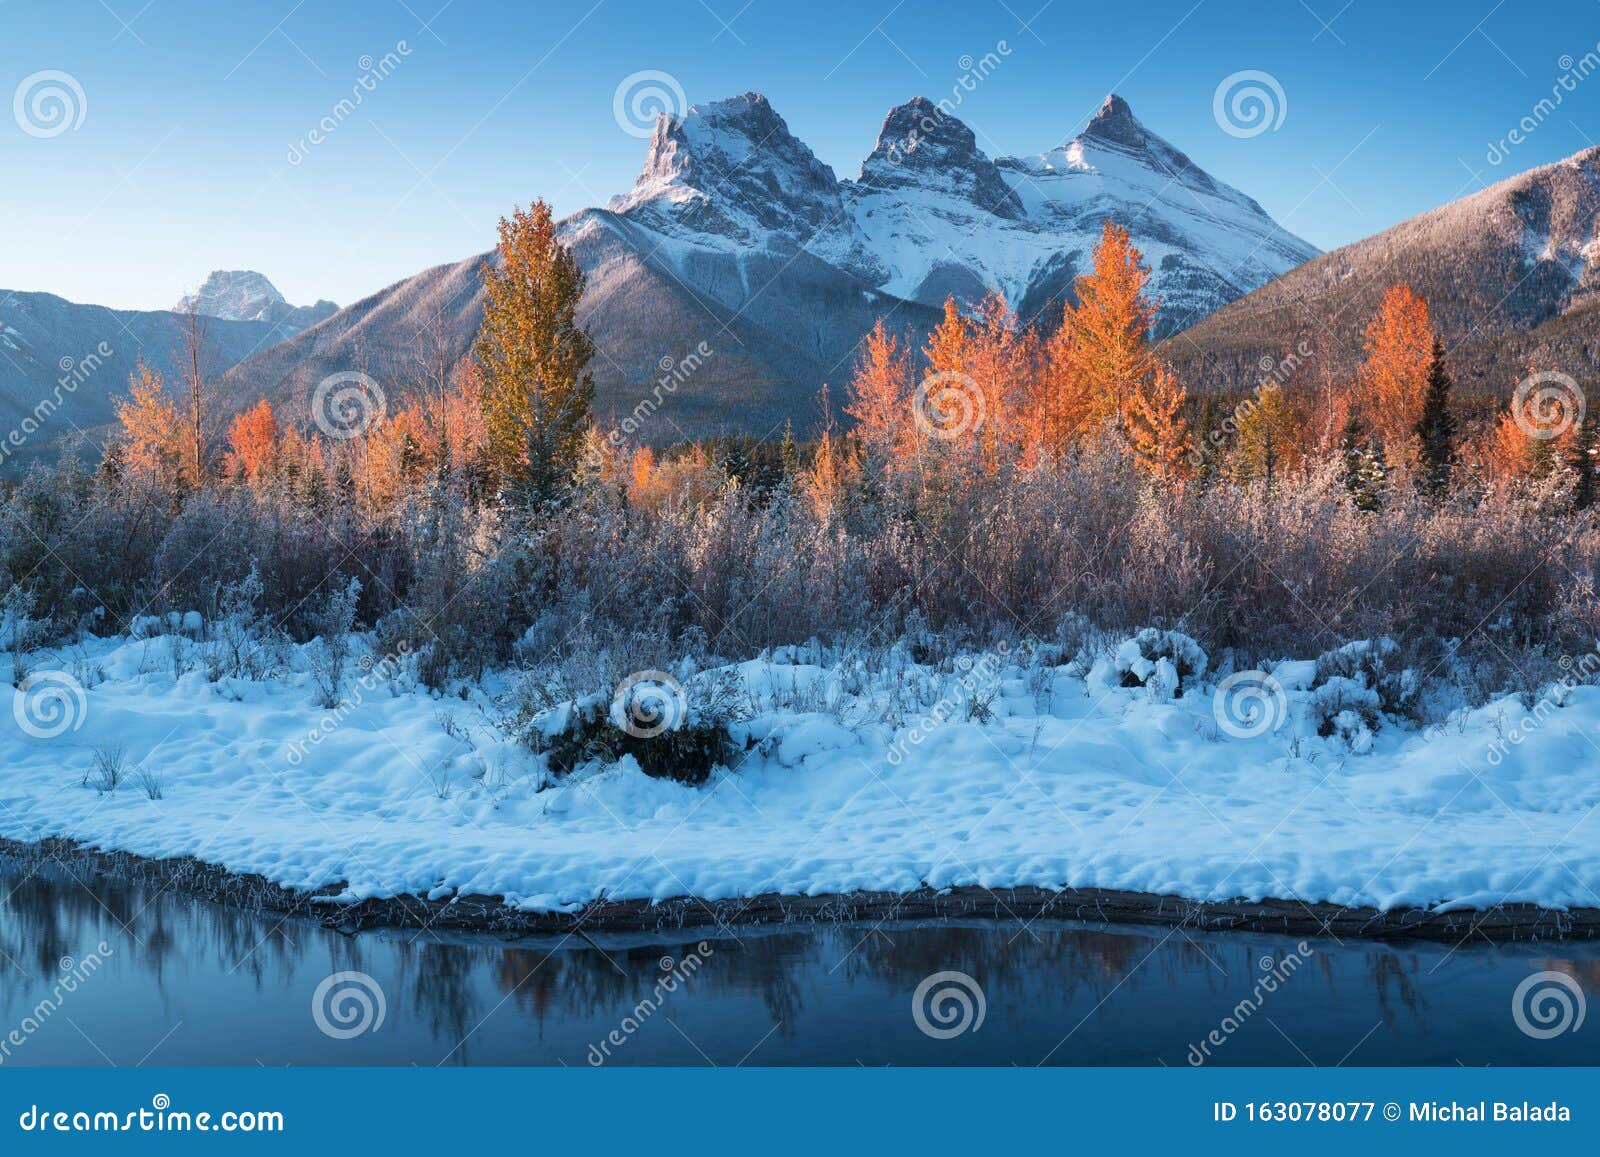 sunrise of the three sisters and the bow river from canmore near banff national park. first snow in canadian rockies.